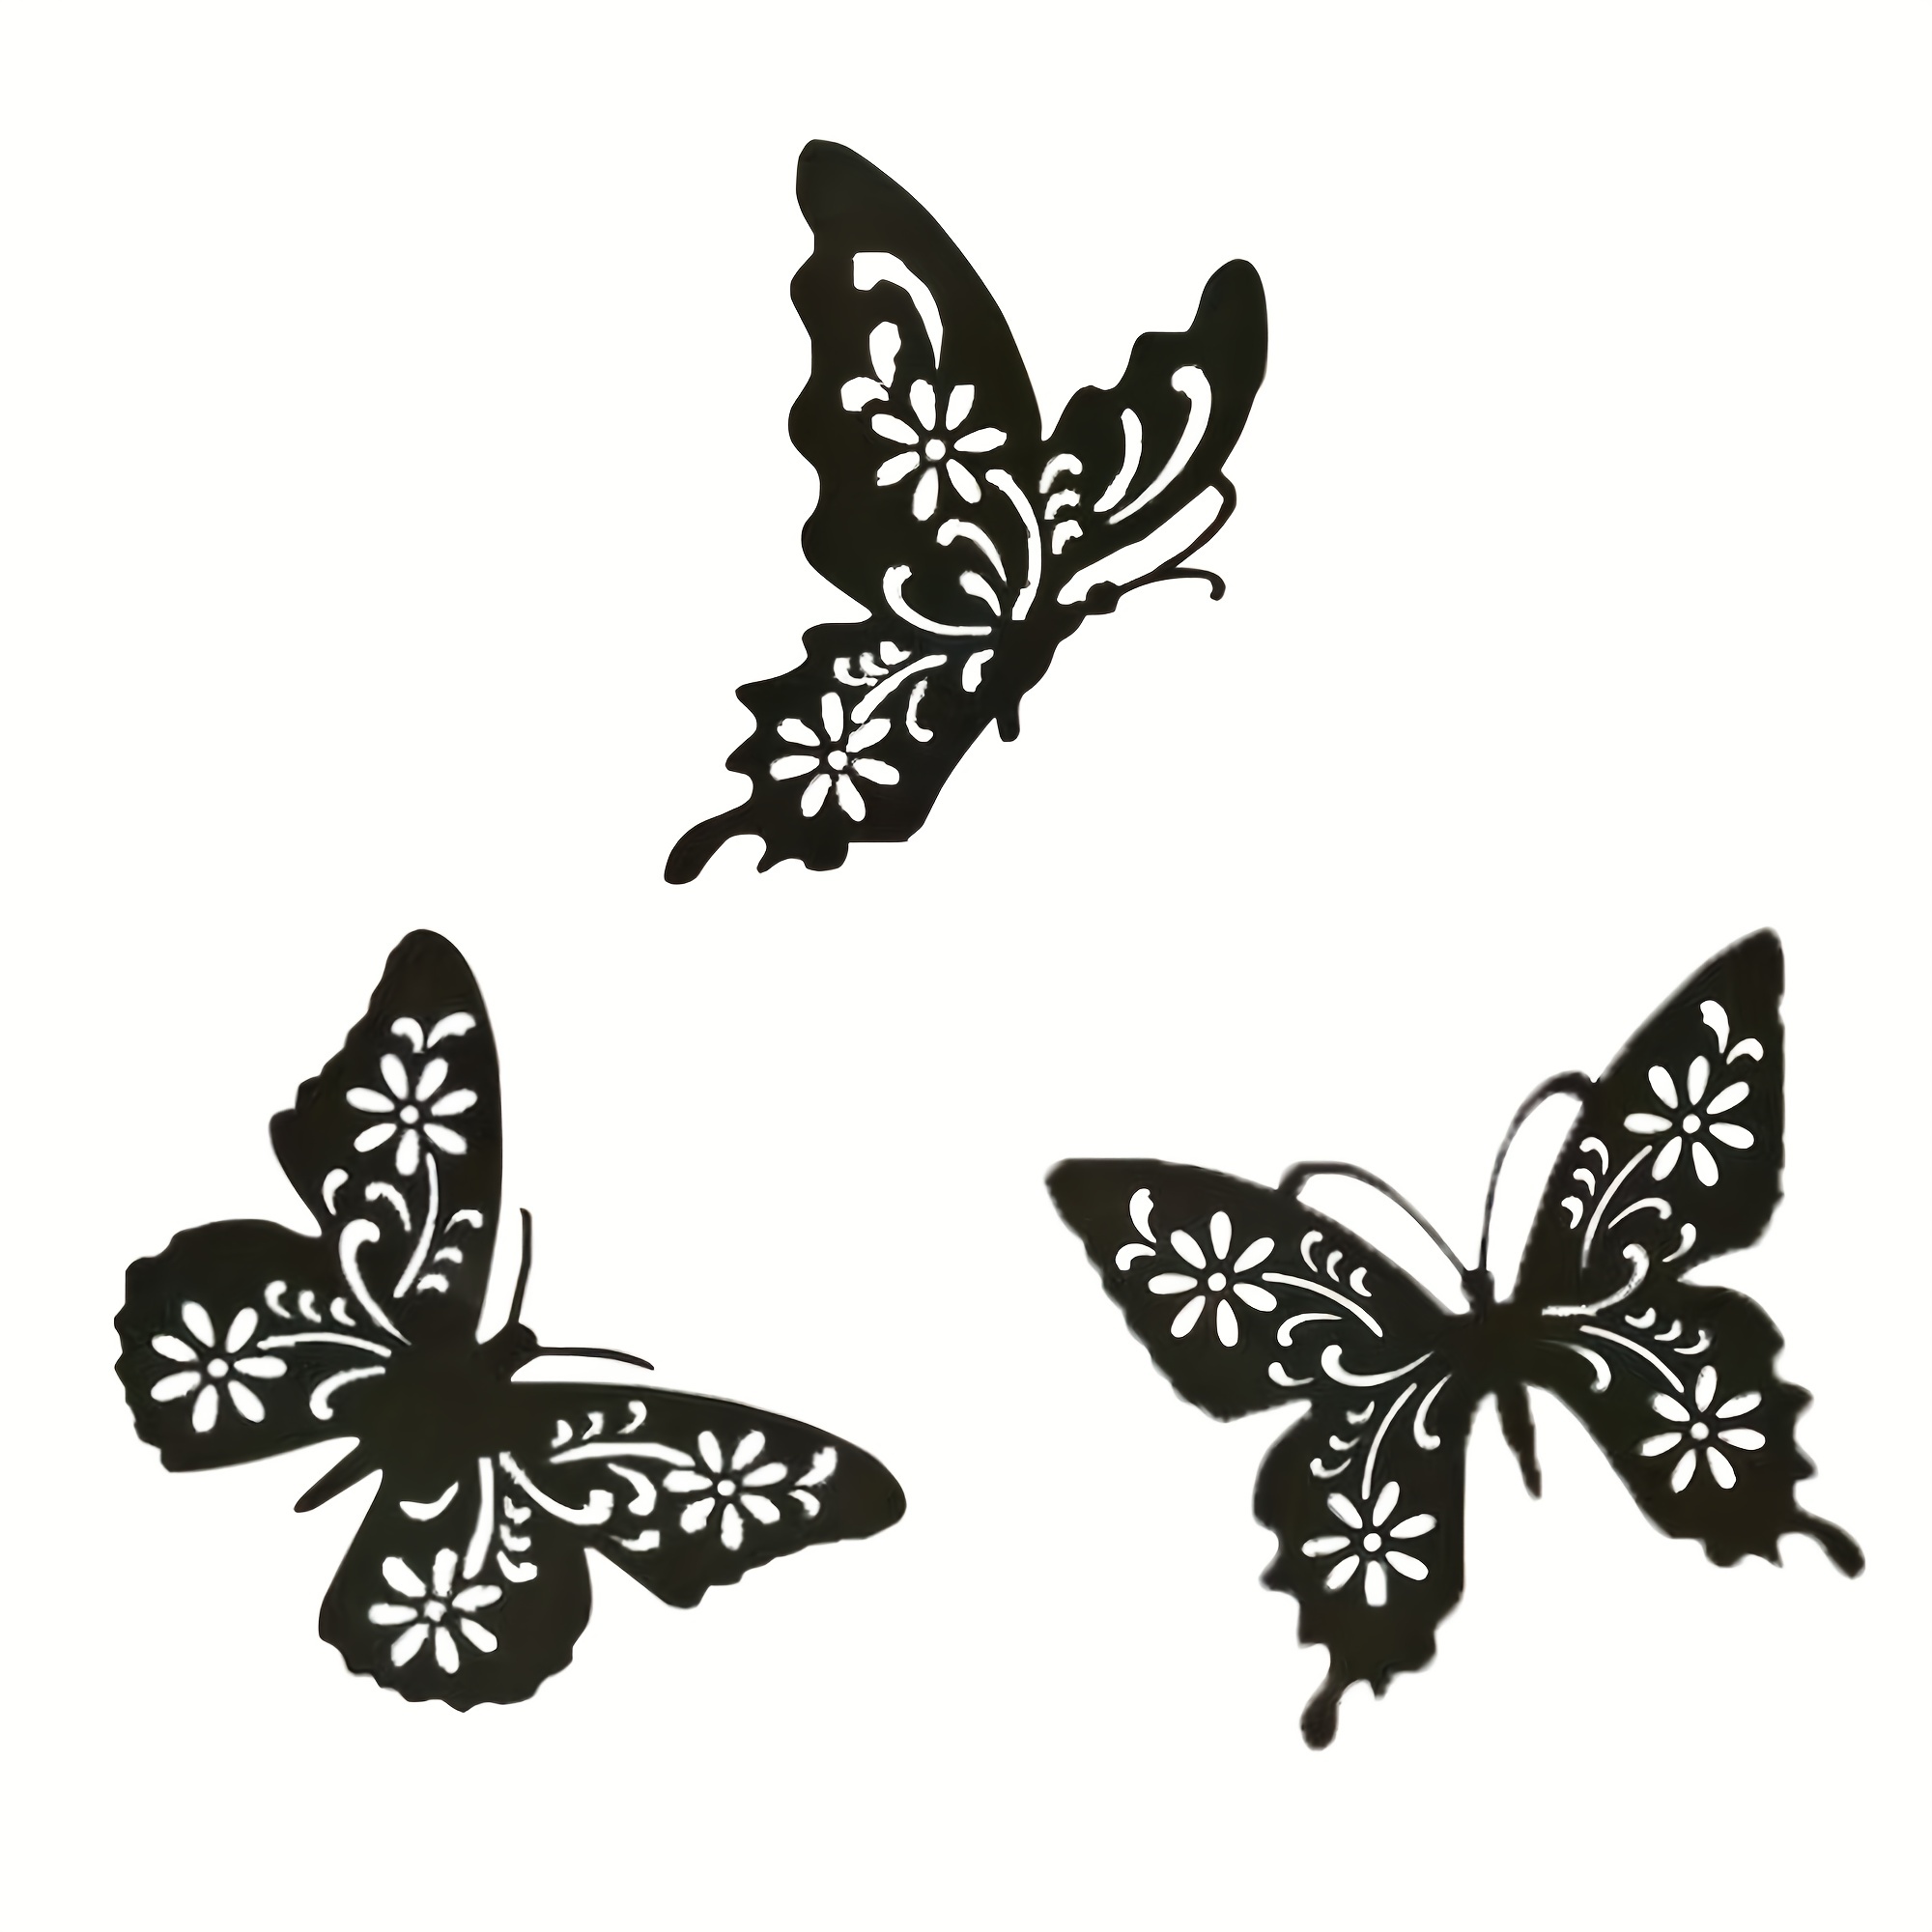 

3pcs/pack, Exquisite Wall Sculpture Art Decor, Black Butterfly Wall Sculpture Metal Butterfly Wall Silhouette Free Combination Of 3 Butterflies For Indoor Garden Decoration Unique Gifts